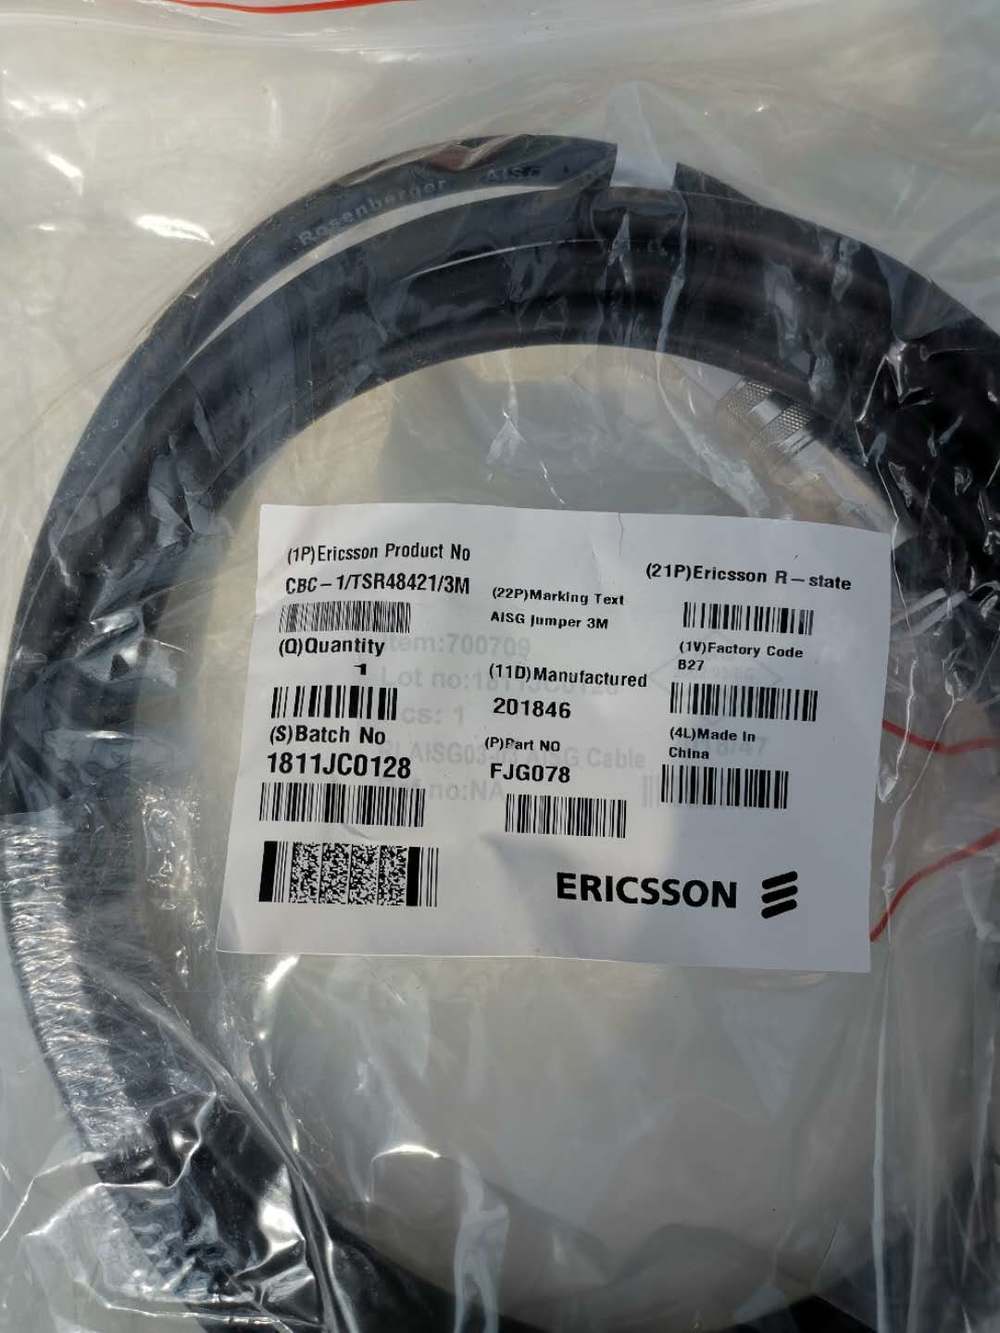 1/TSR48431/3000 cable